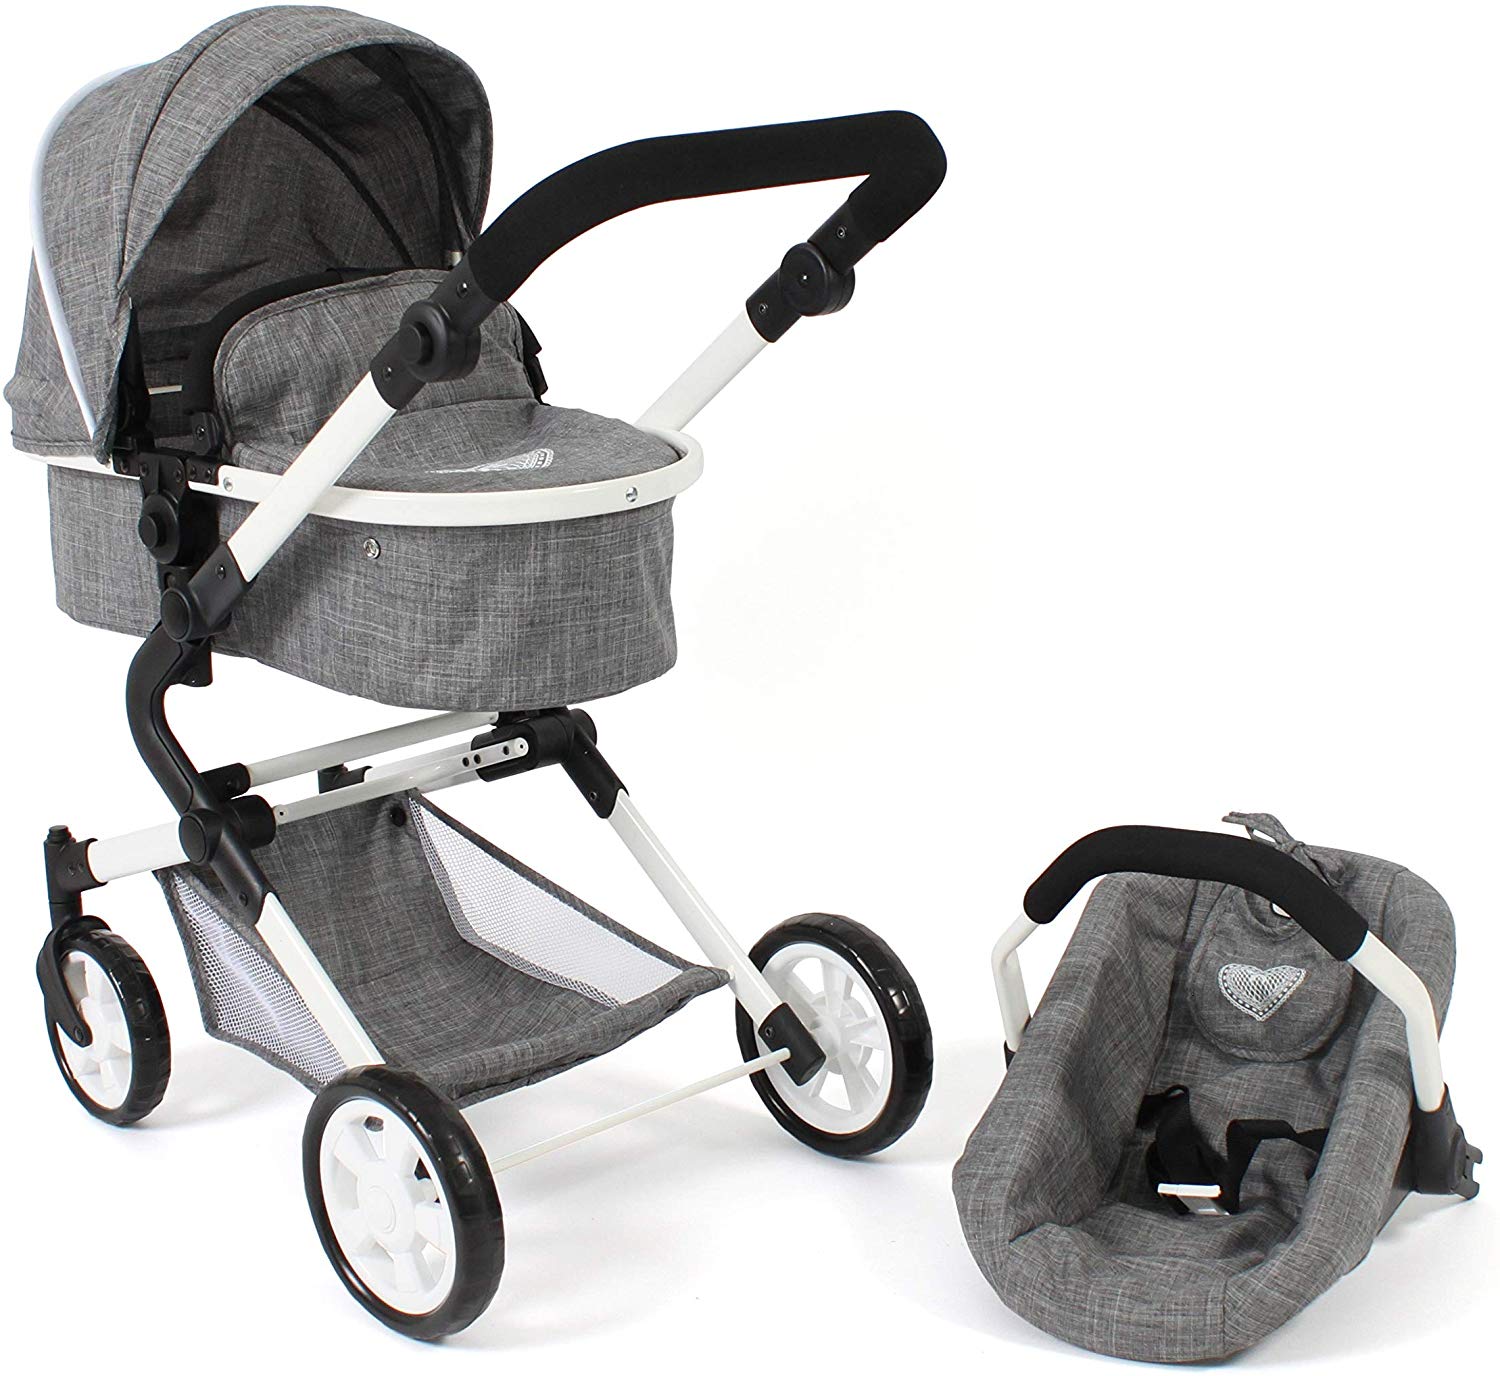 Bayer Chic 2000 597 76 3-in-1 Combi Lia, Doll\'s Pram Set with Car Seat, Baby Bath and Sport Seat, Denim Grey